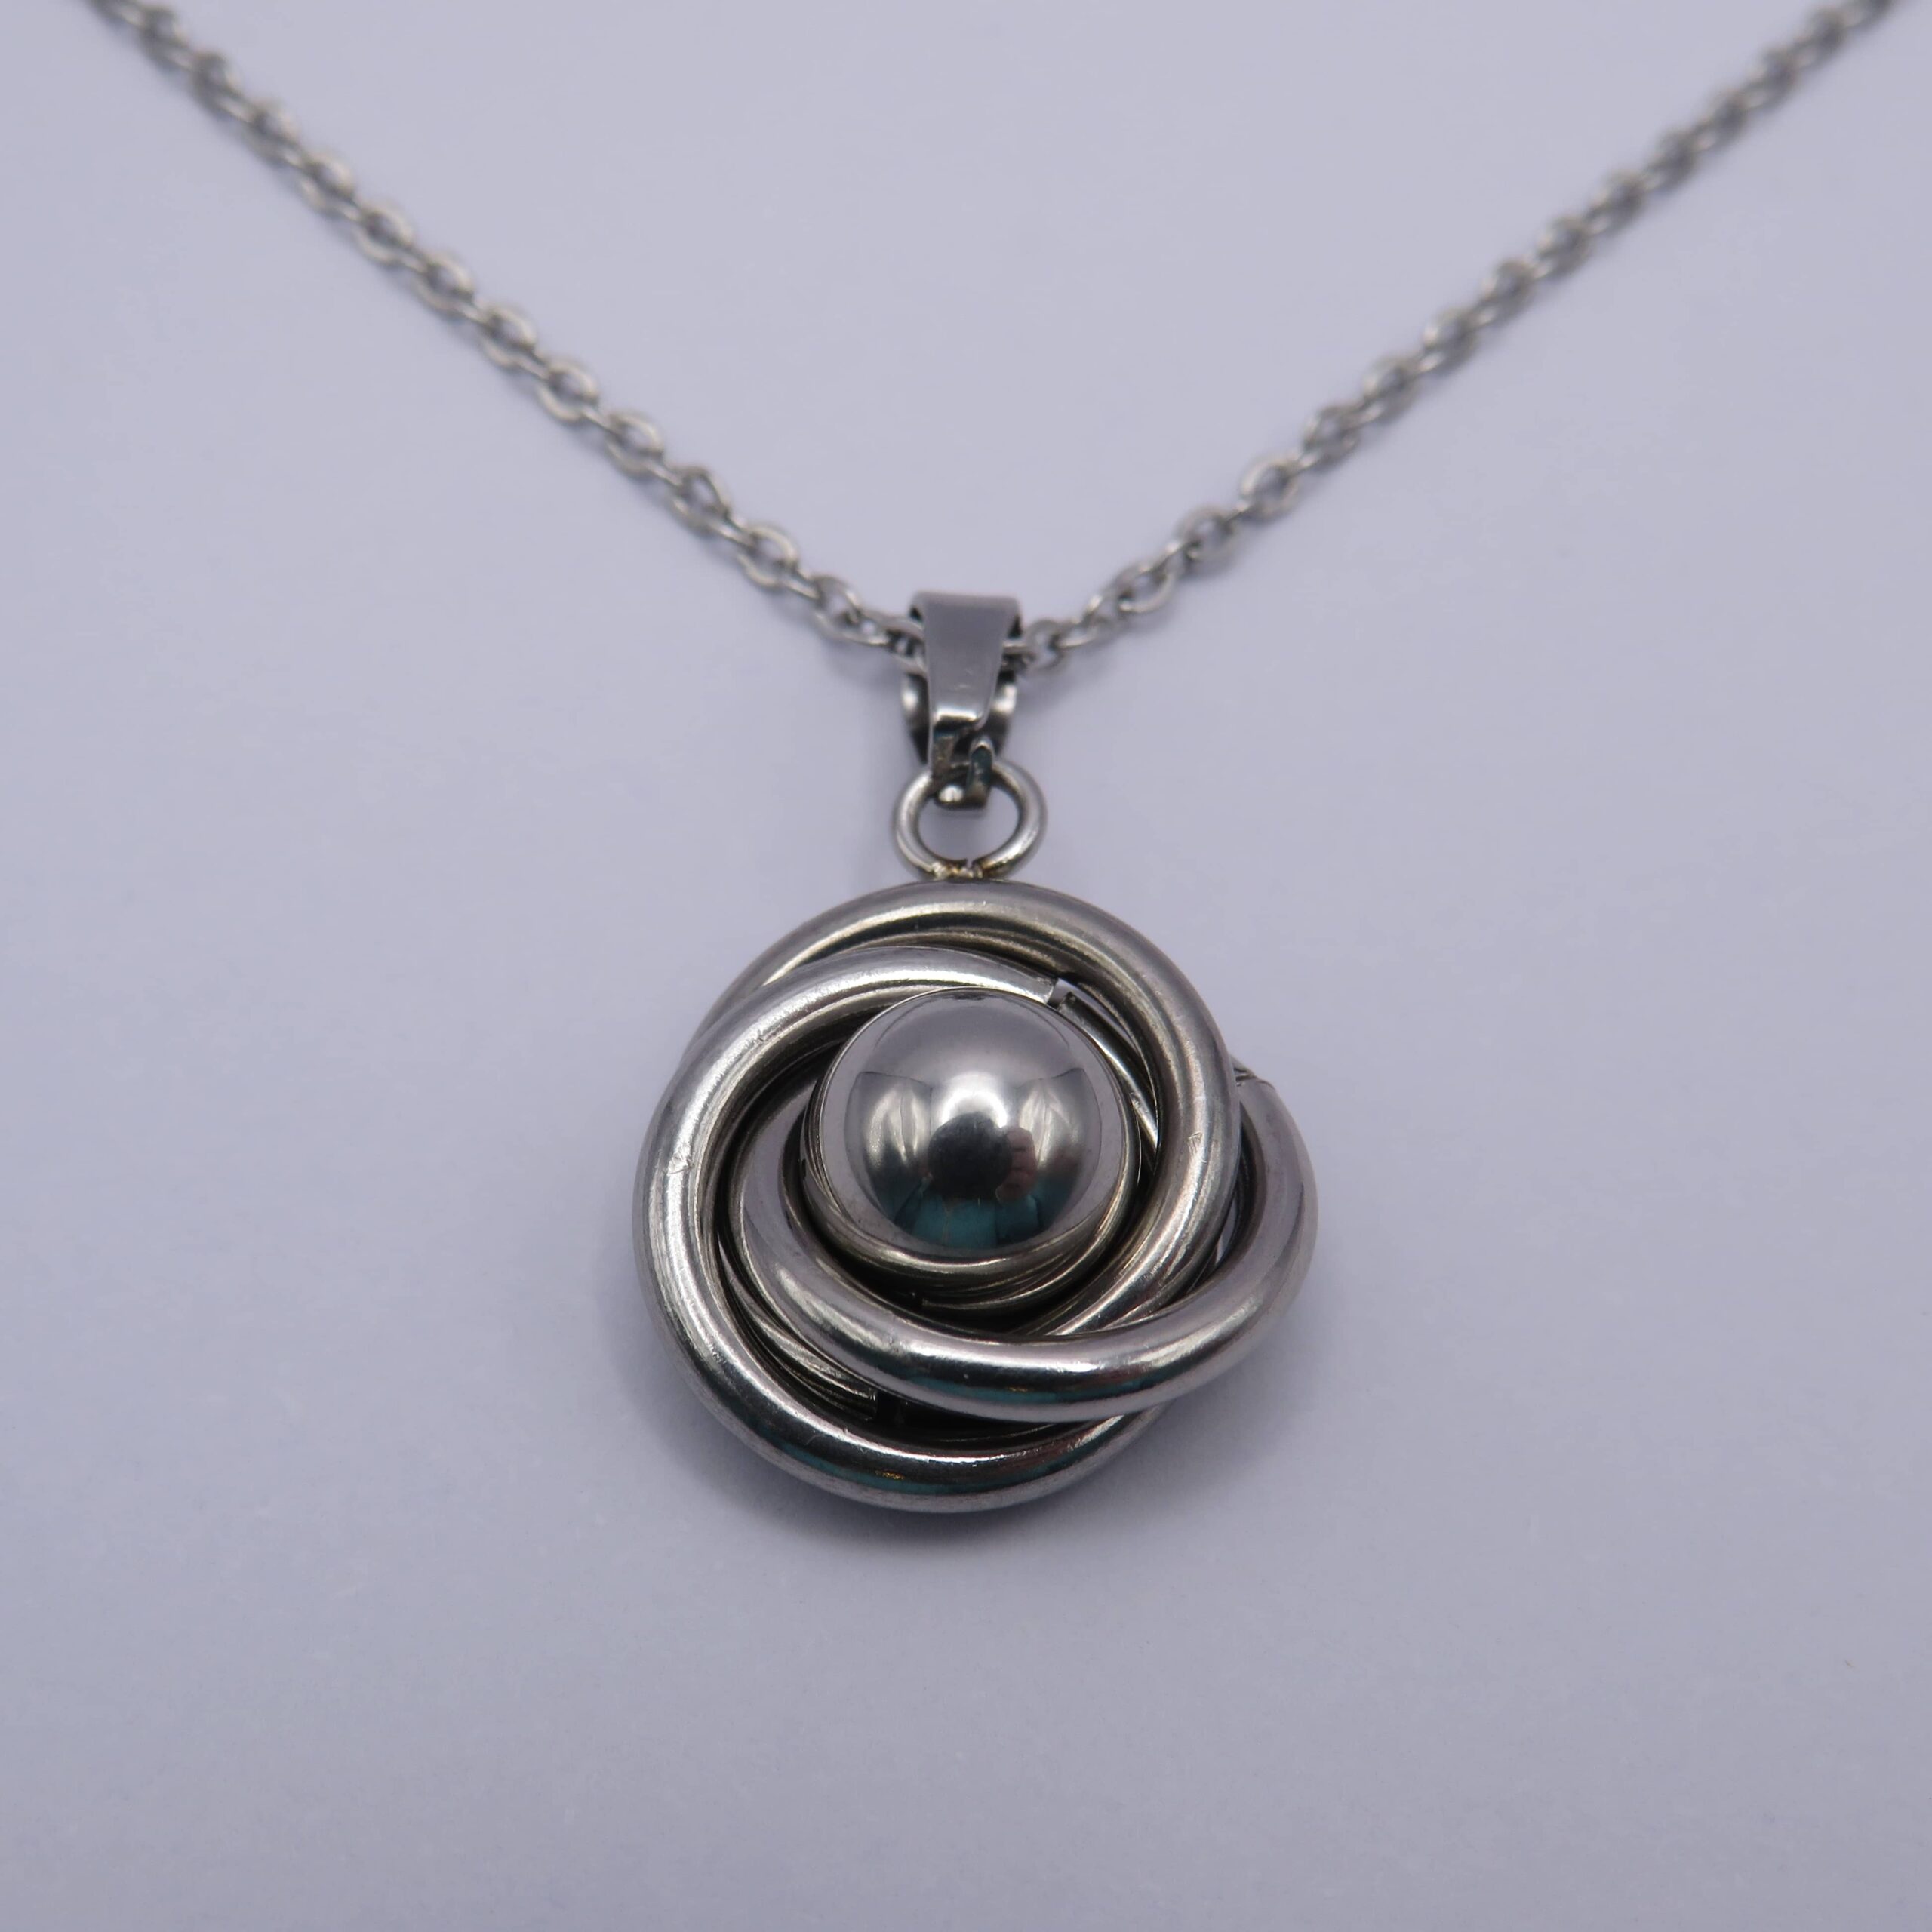 Stainless Steel Ball Necklace